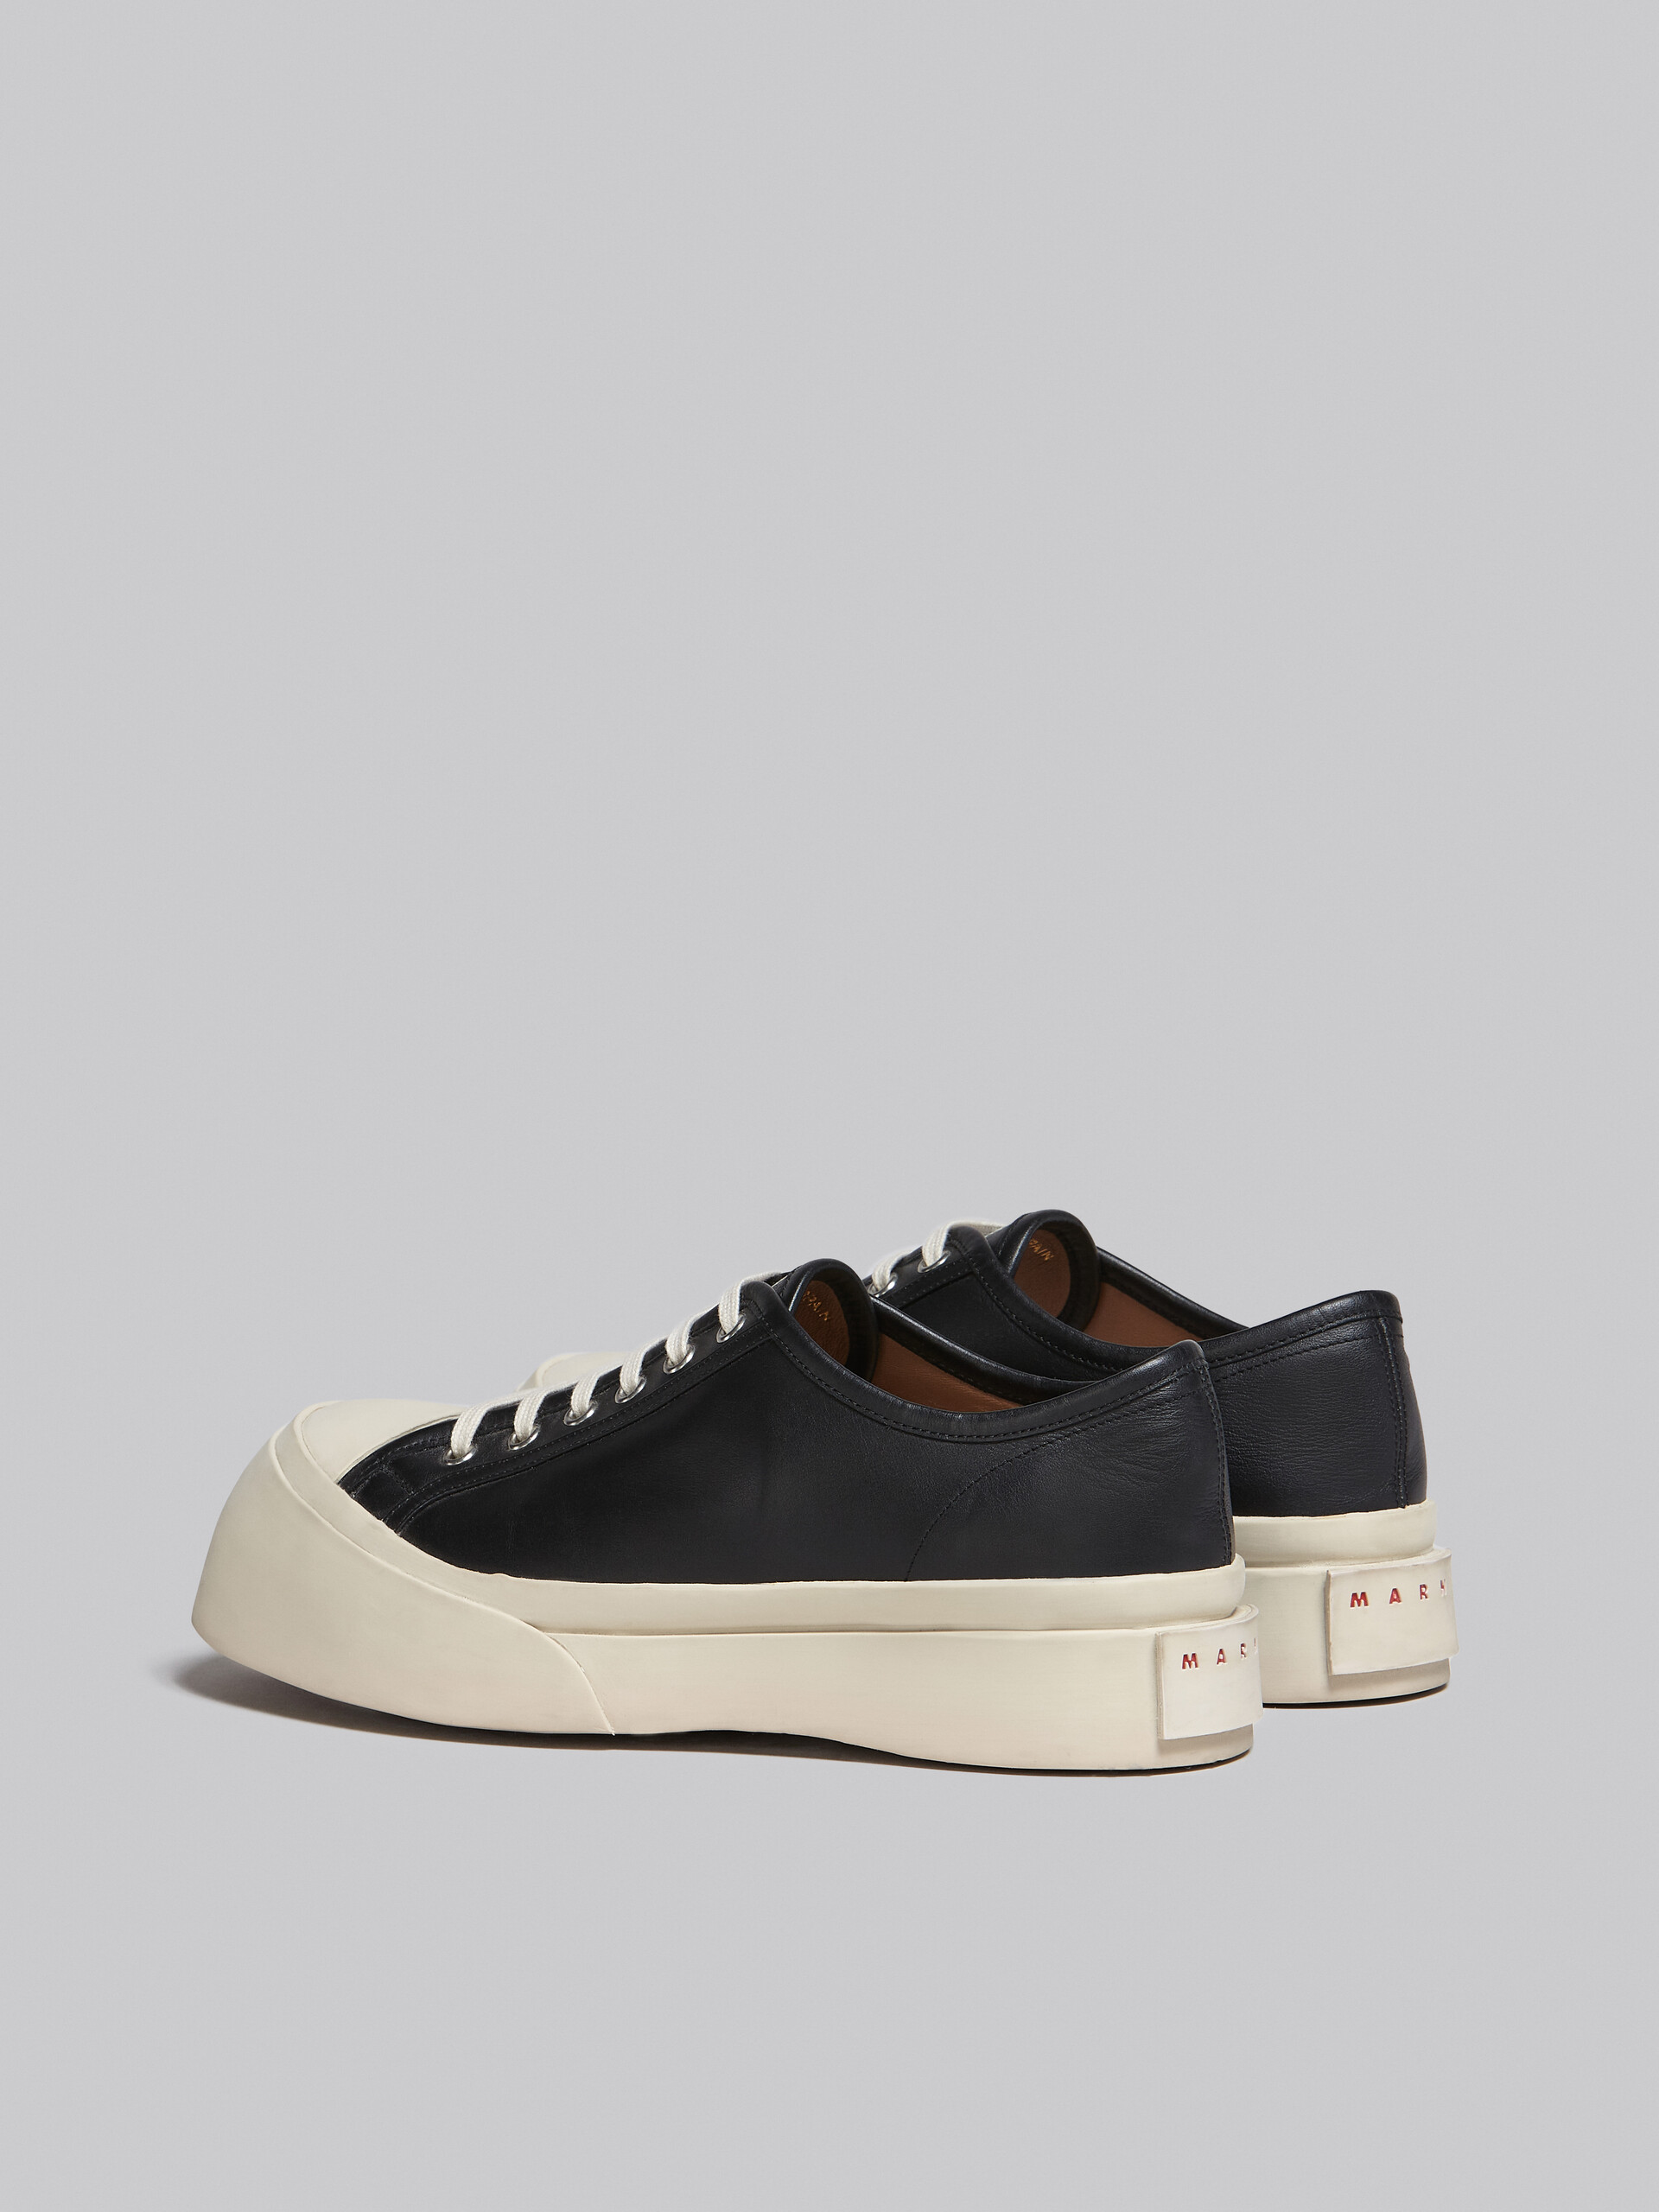 Black nappa leather Pablo lace-up sneaker